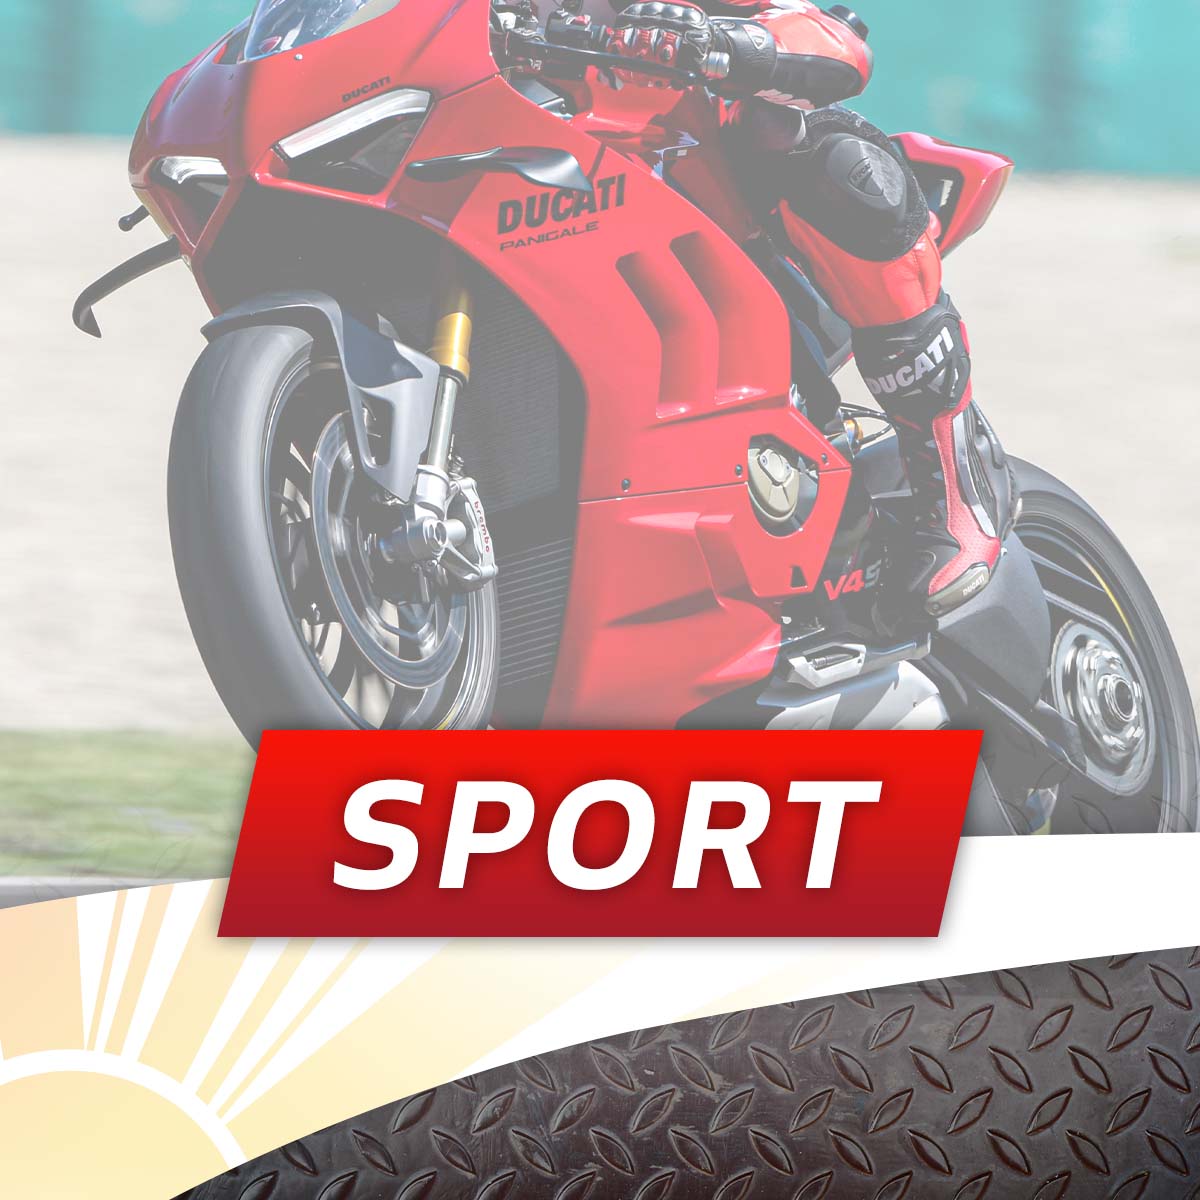 Join us at our Laguna Ducati Summer Celebration Event on Saturday 30th July and enter our Sport category for our Ducati bike competition!